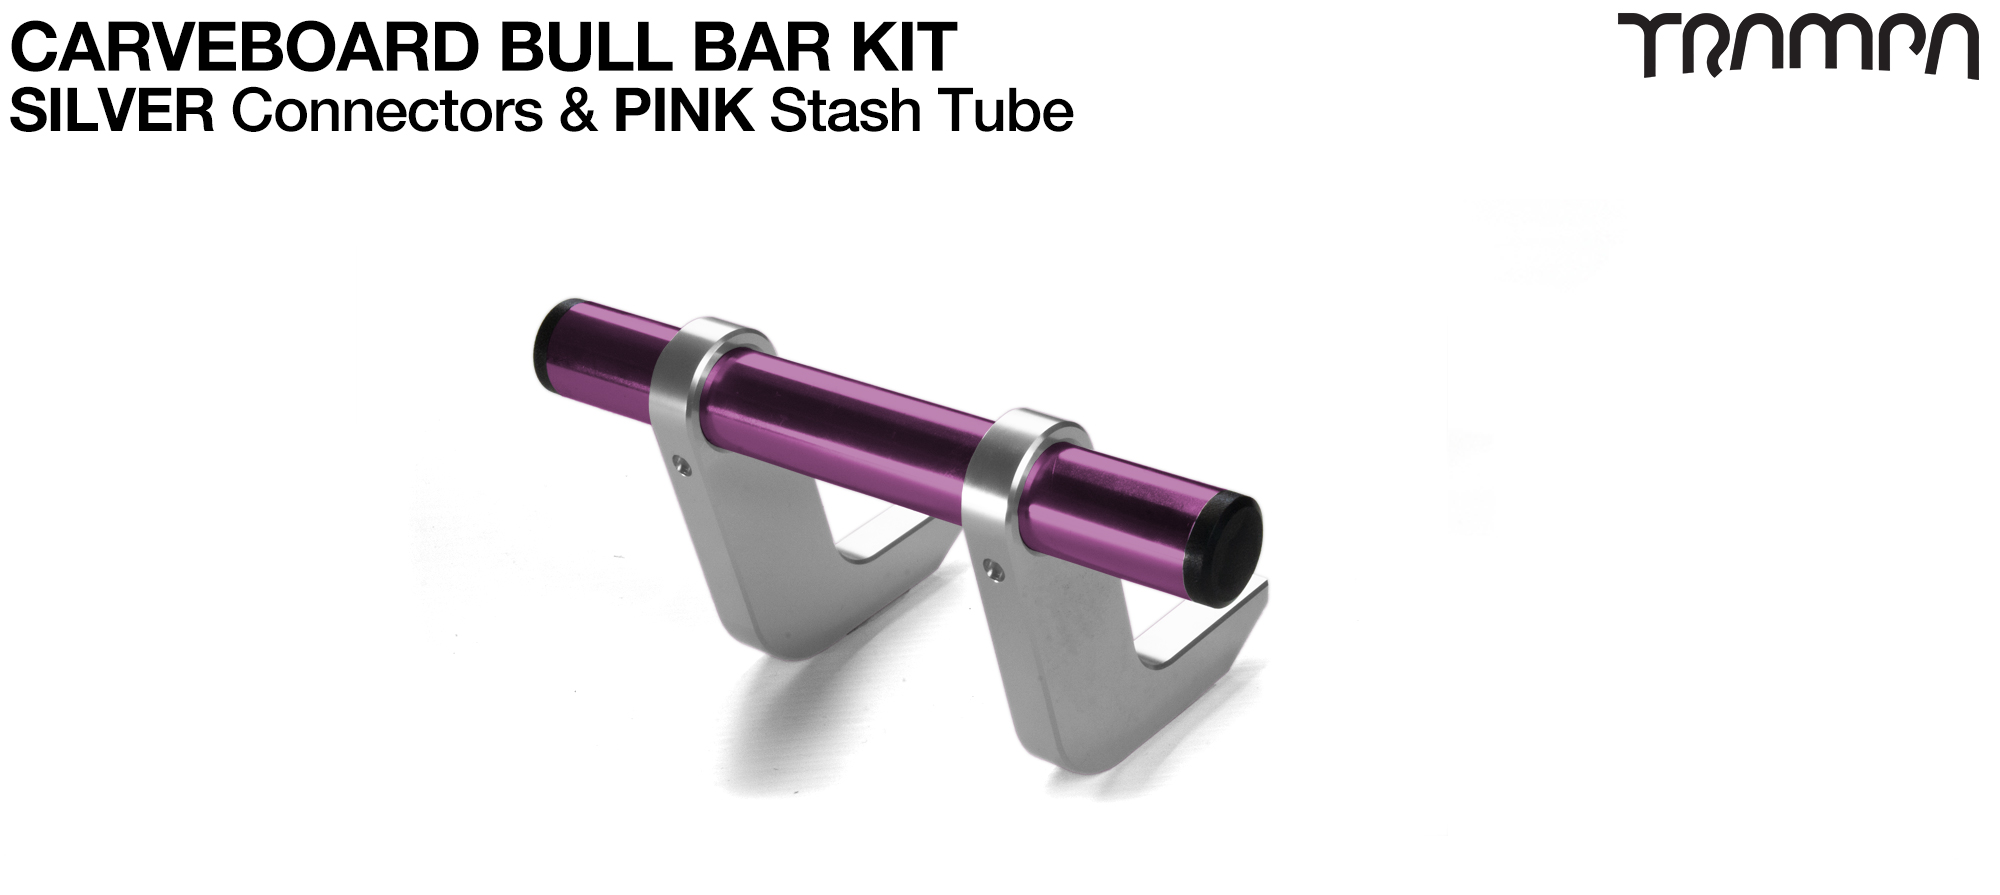 SILVER Uprights & PINK Crossbar BULL BARS for CARVE BOARDS using T6 Heat Treated CNC'd Aluminum Clamps, Hollow Aluminium Stash Tubes with Rubber end bungs 